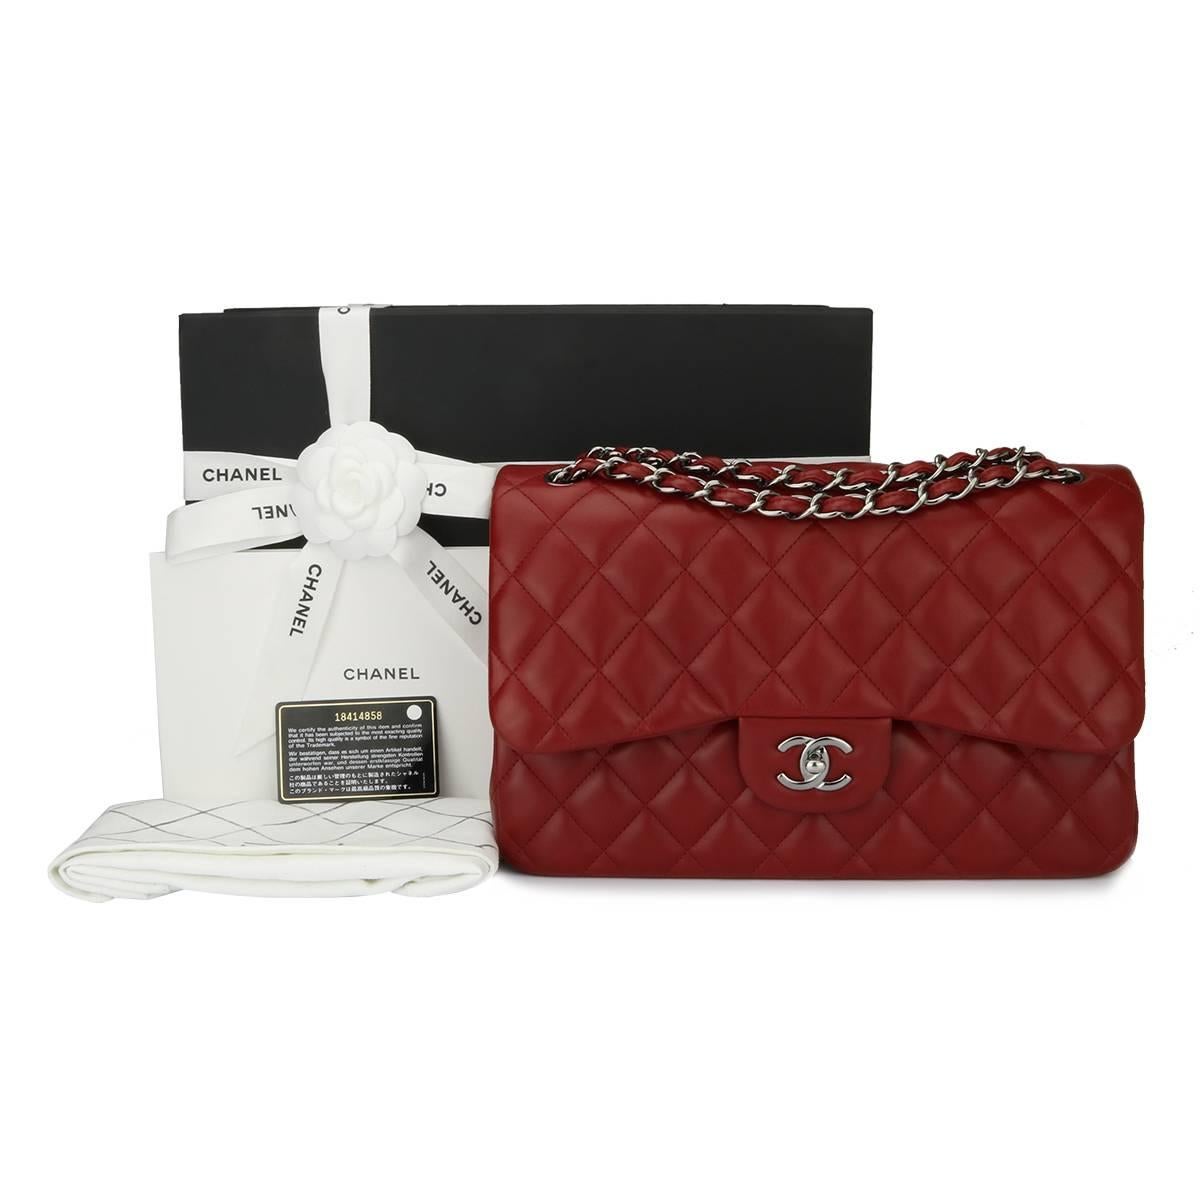 Authentic CHANEL Classic Double Flap Jumbo Bag Lipstick Red Lambskin with Light Gunmetal Hardware 2014.

This stunning bag is in a mint condition, the bag still holds its original shape, and the hardware is still very shiny. Leather smells fresh as